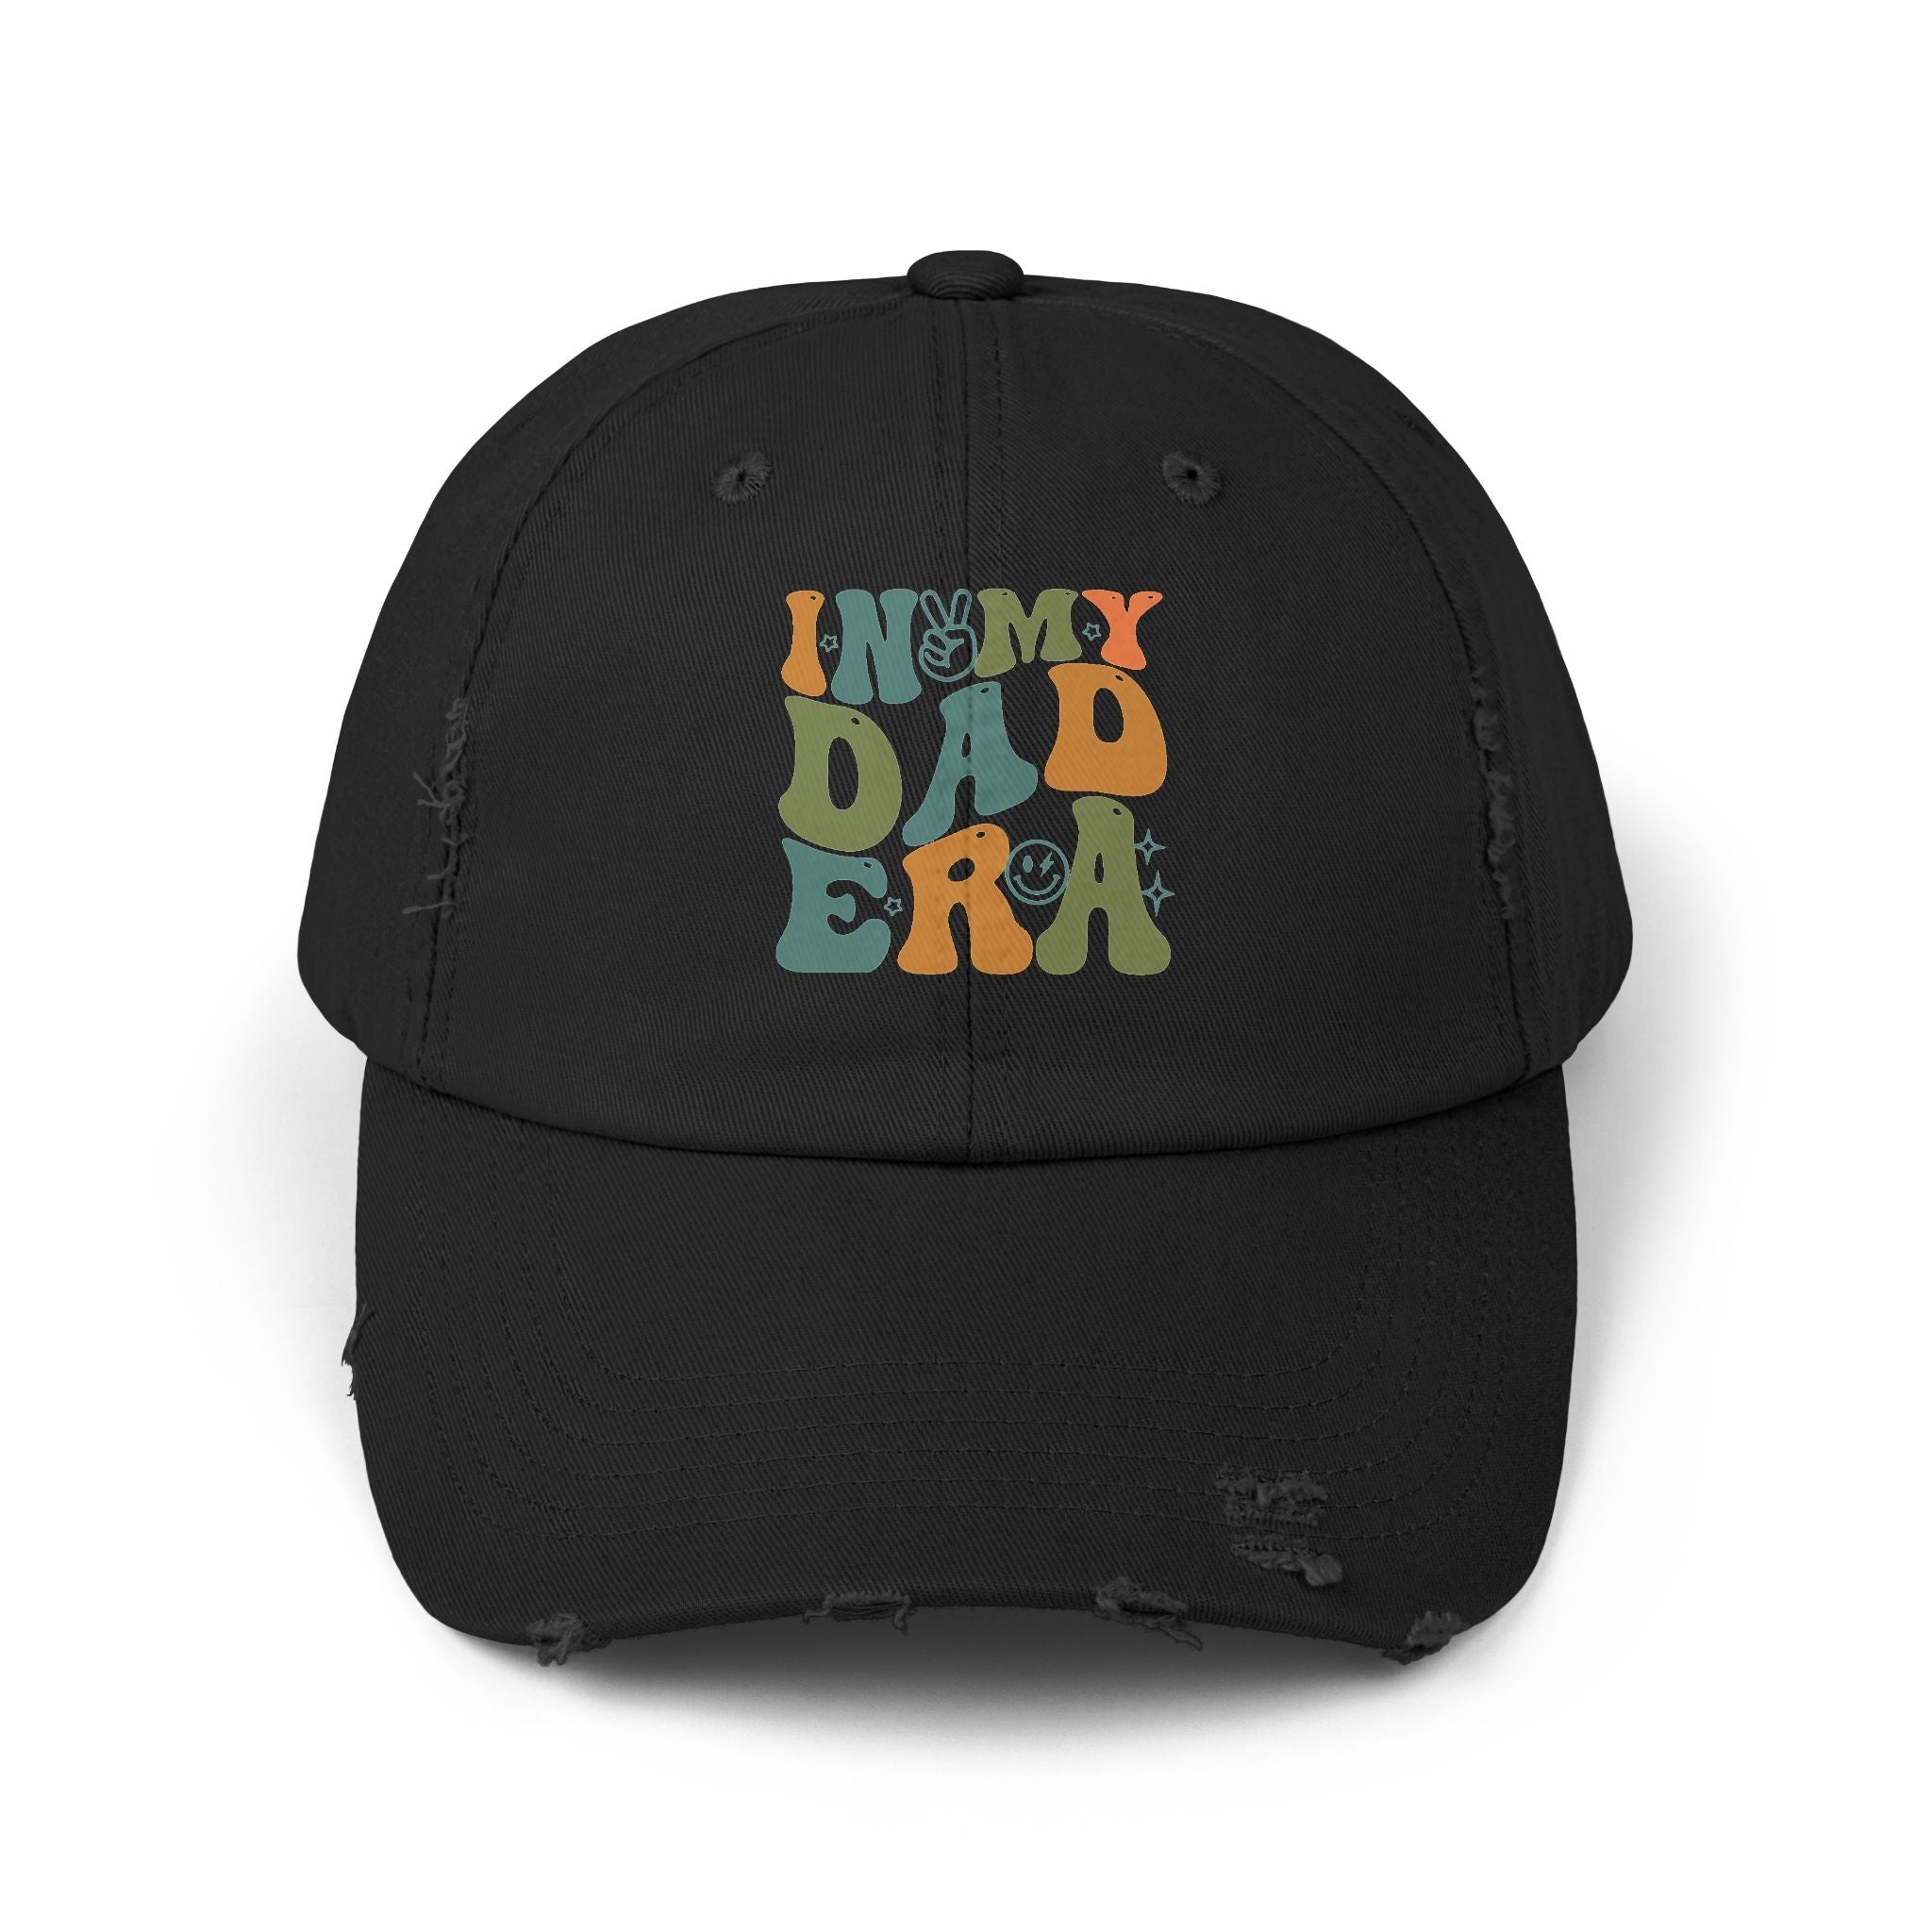 Distressed In My DAD ERA - Black / One size - Hats